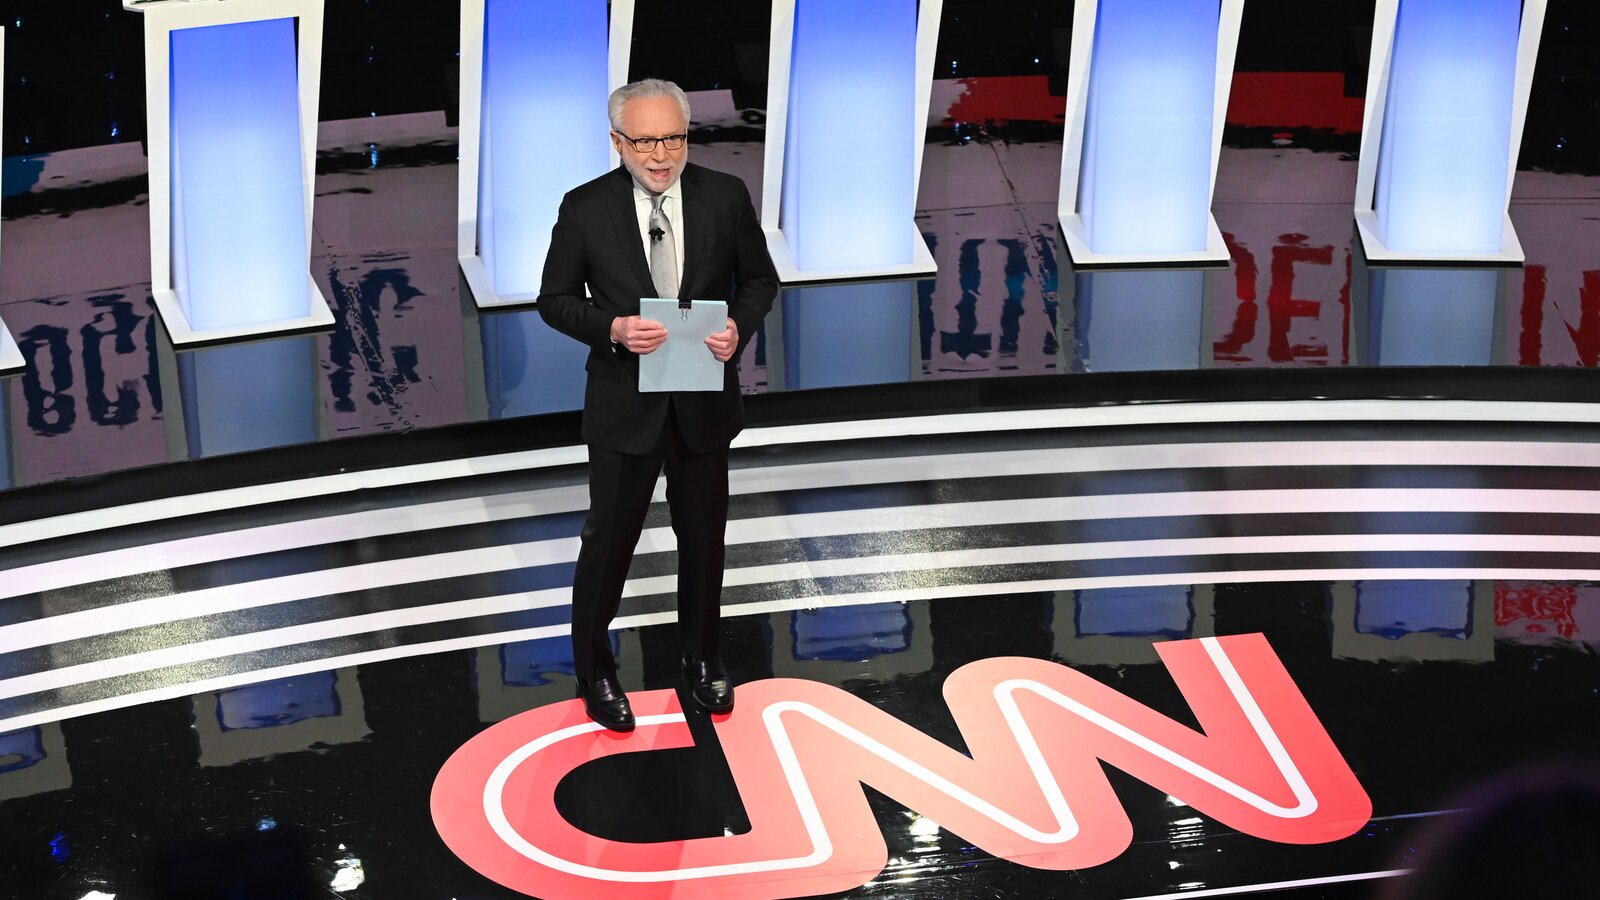 Wolf blitzer passes torch to jake tapper for cnn election coverage